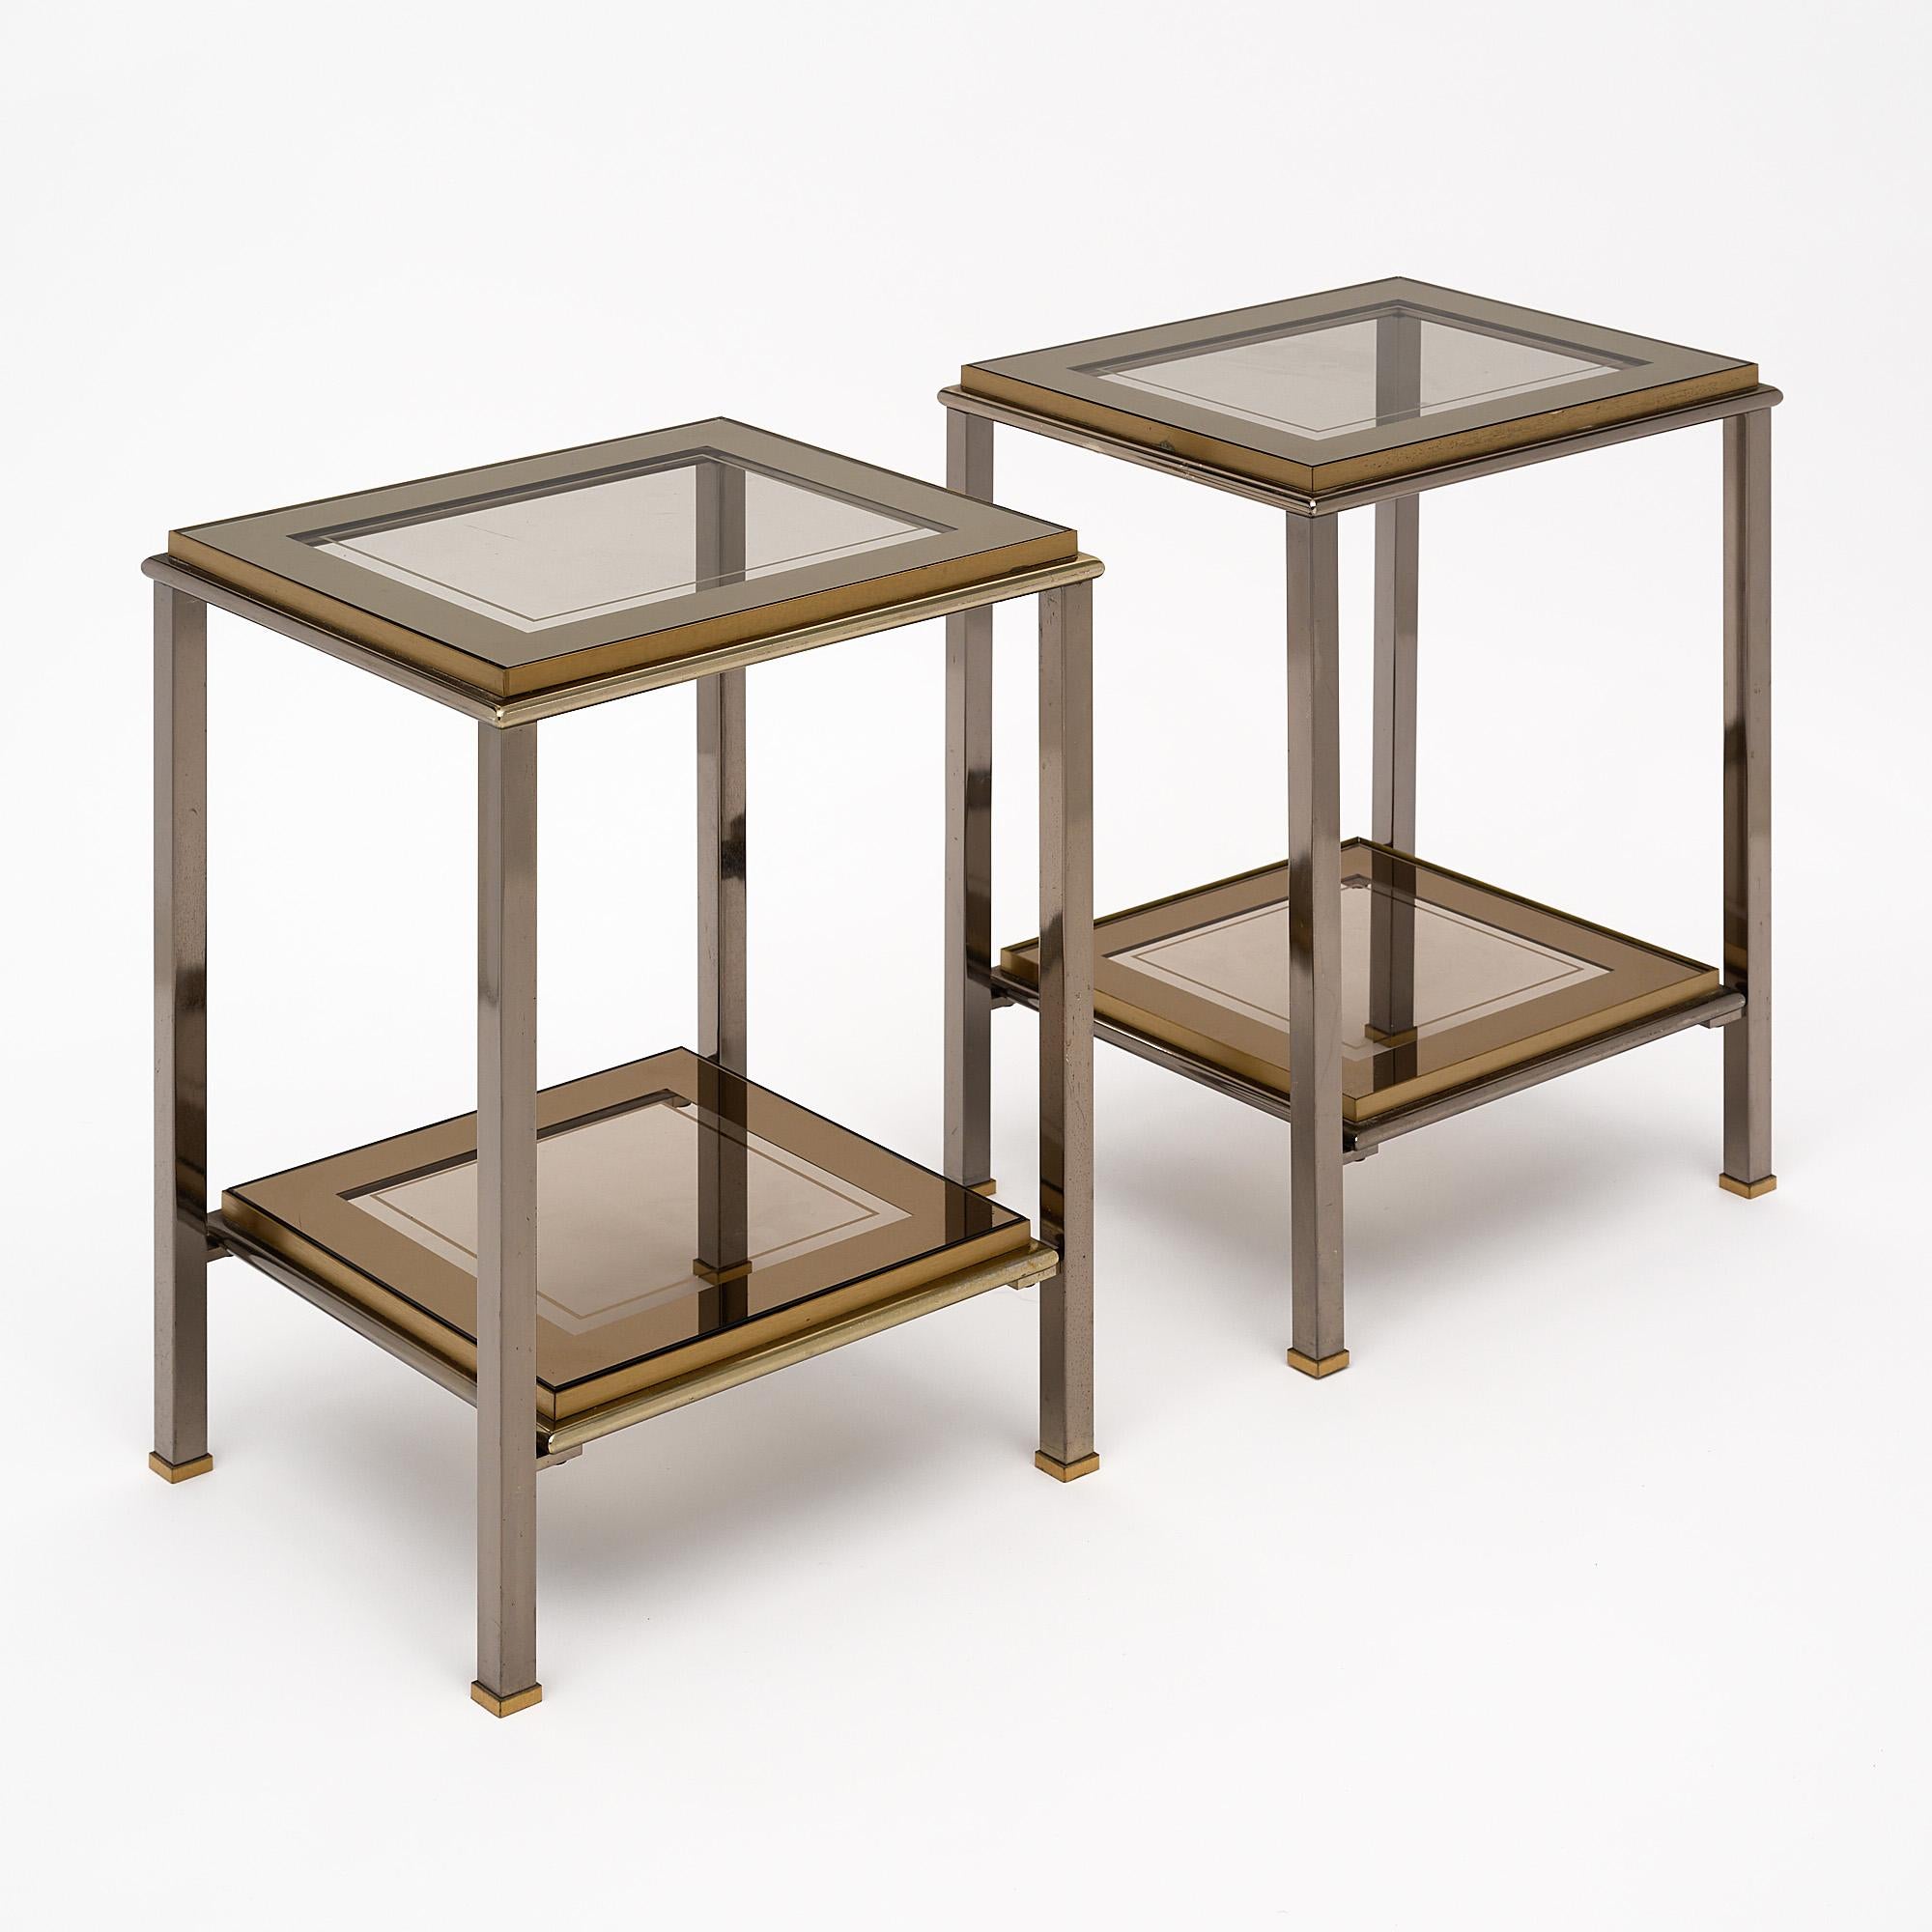 Modernist French side tables made of brass. This pair features two shelves of smoked glass with the original mirrored banding on the glass. The pair has two-toned metal finishes, both brass and a gunmetal toned finish.